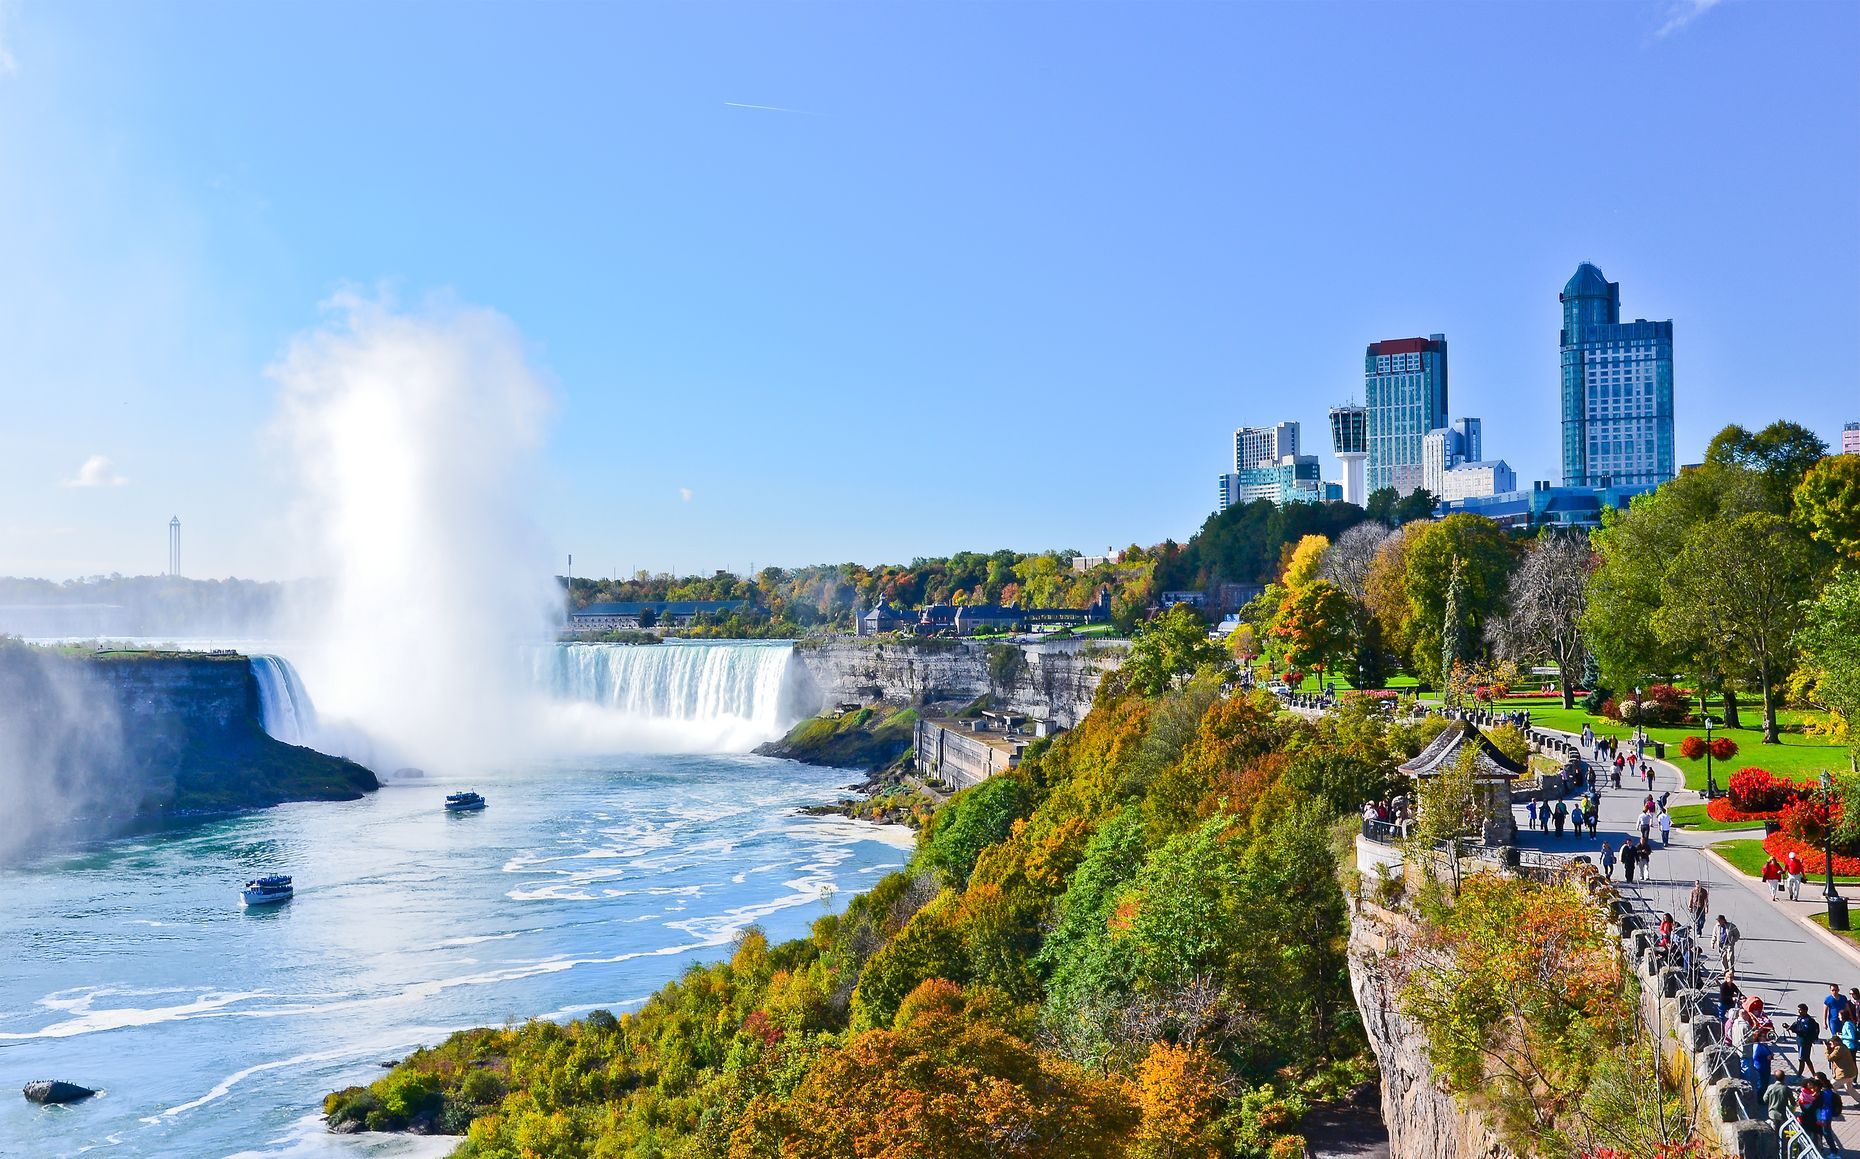 <p>Sure, it’s sometimes considered one of the <a href="https://www.niagarafallshotels.com/blog/niagara-falls-8th-wonder-world/#:~:text=While%20there%20is%20no%20'official,th%20wonder%20of%20the%20world.">wonders of the world</a>, but it is also Canada’s biggest <a href="https://www.thestar.com/news/canada/niagara-falls-one-of-the-worst-tourist-traps-in-the-world-report-finds/article_be02d6d7-0f9b-5090-acaf-bdd6220e429c.html">tourist trap</a>. Niagara Falls is comprised of three beautiful waterfalls surrounded by tacky and underwhelming attractions. Tourists have described the town as expensive and overcrowded—it is only a perfect location if you have money to burn. For a more sophisticated trip, try <a href="https://www.niagarafallstourism.com/niagara-region/niagara-on-the-lake/#:~:text=Beyond%20the%20quaint%20downtown%20and,of%20world%20famous%20Niagara%20Icewine.">Niagara-on-the-Lake</a>, known for its quaint downtown, world-renowned theatre, and award-winning wineries. </p>